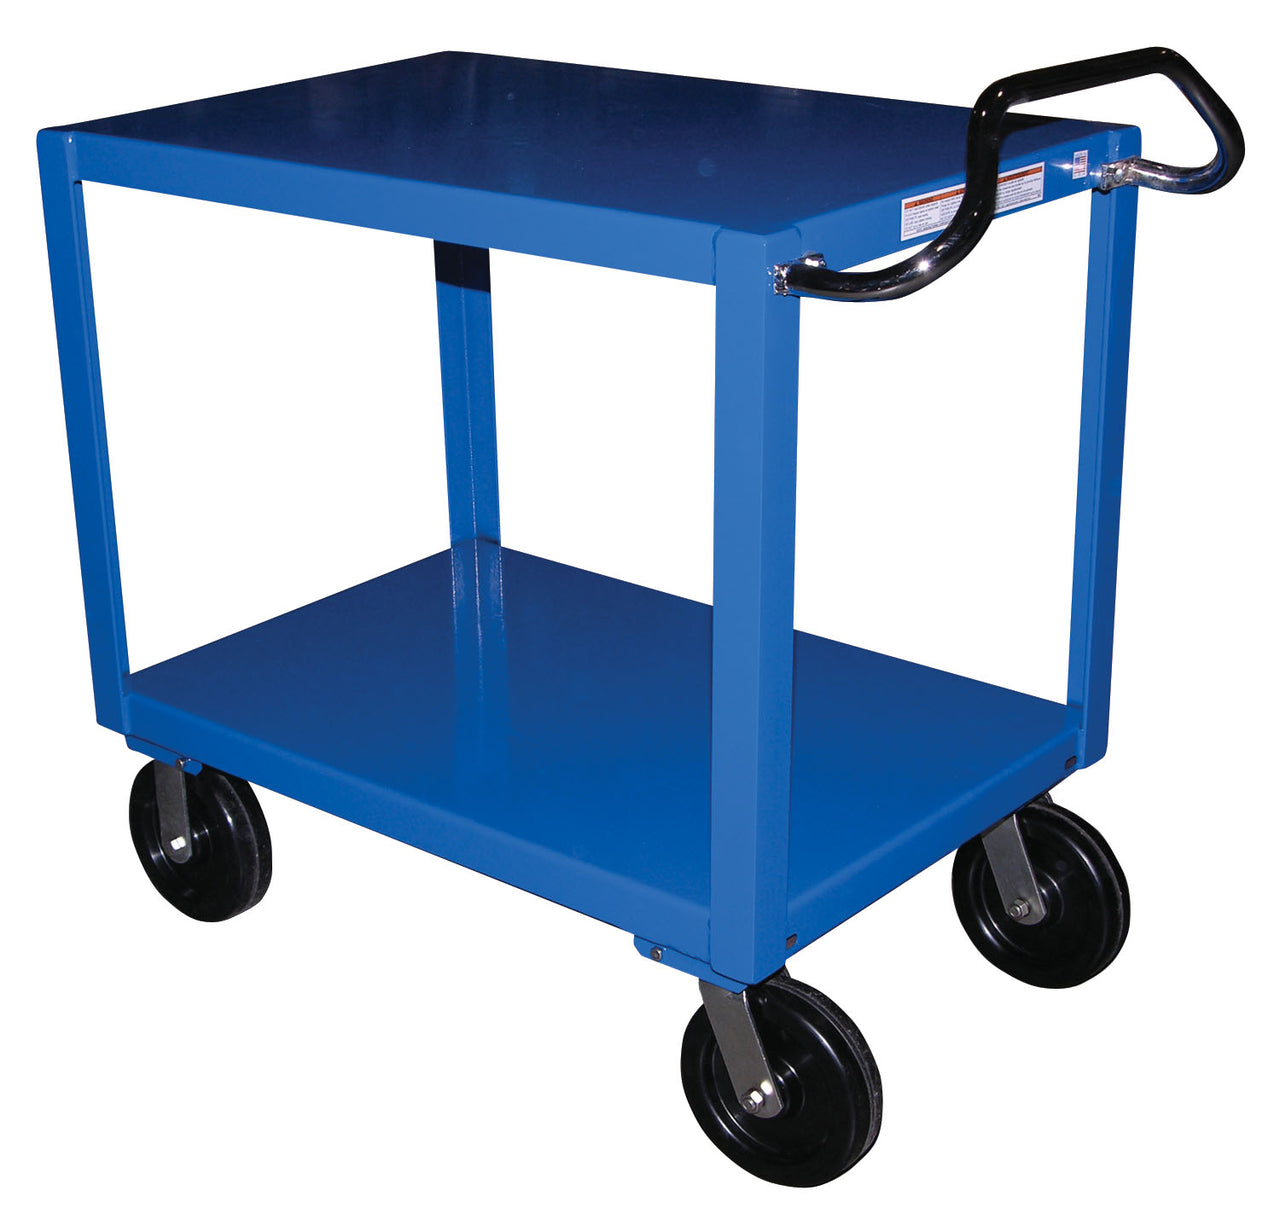 24" x 48" Ergo-Handle Cart w/ Mold-on-Rubber Casters